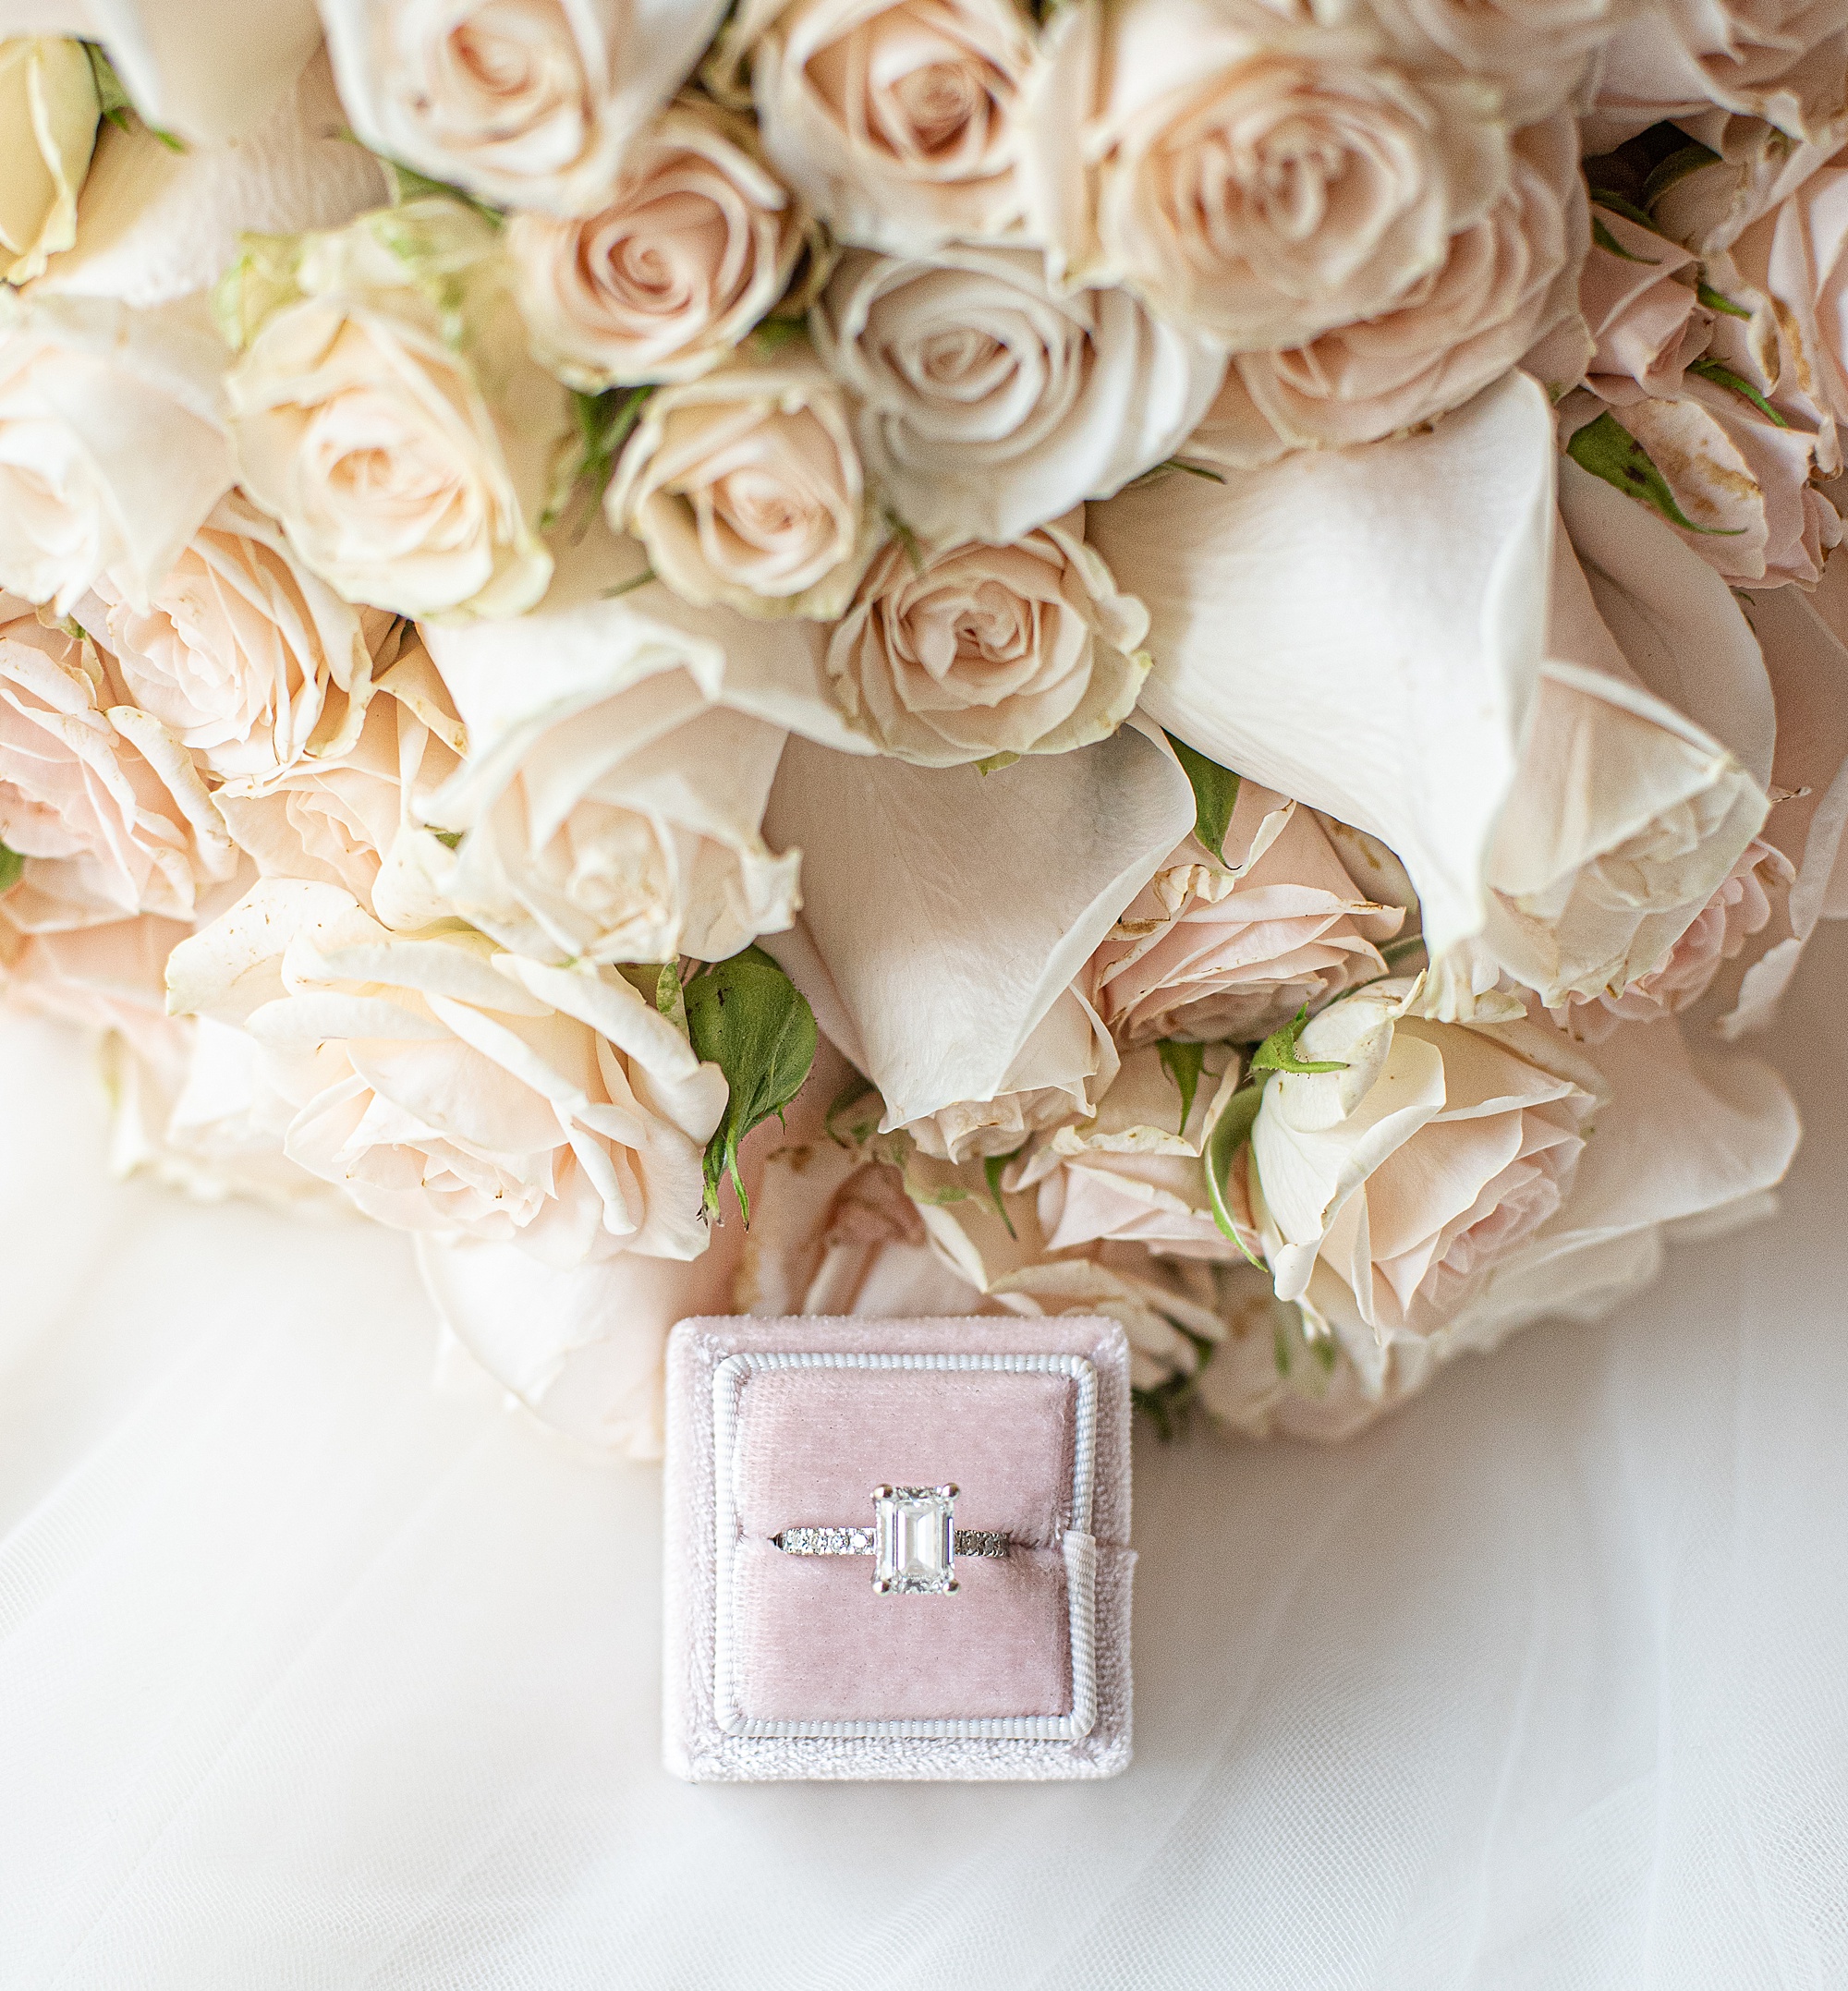 bride's ring rests in pink box